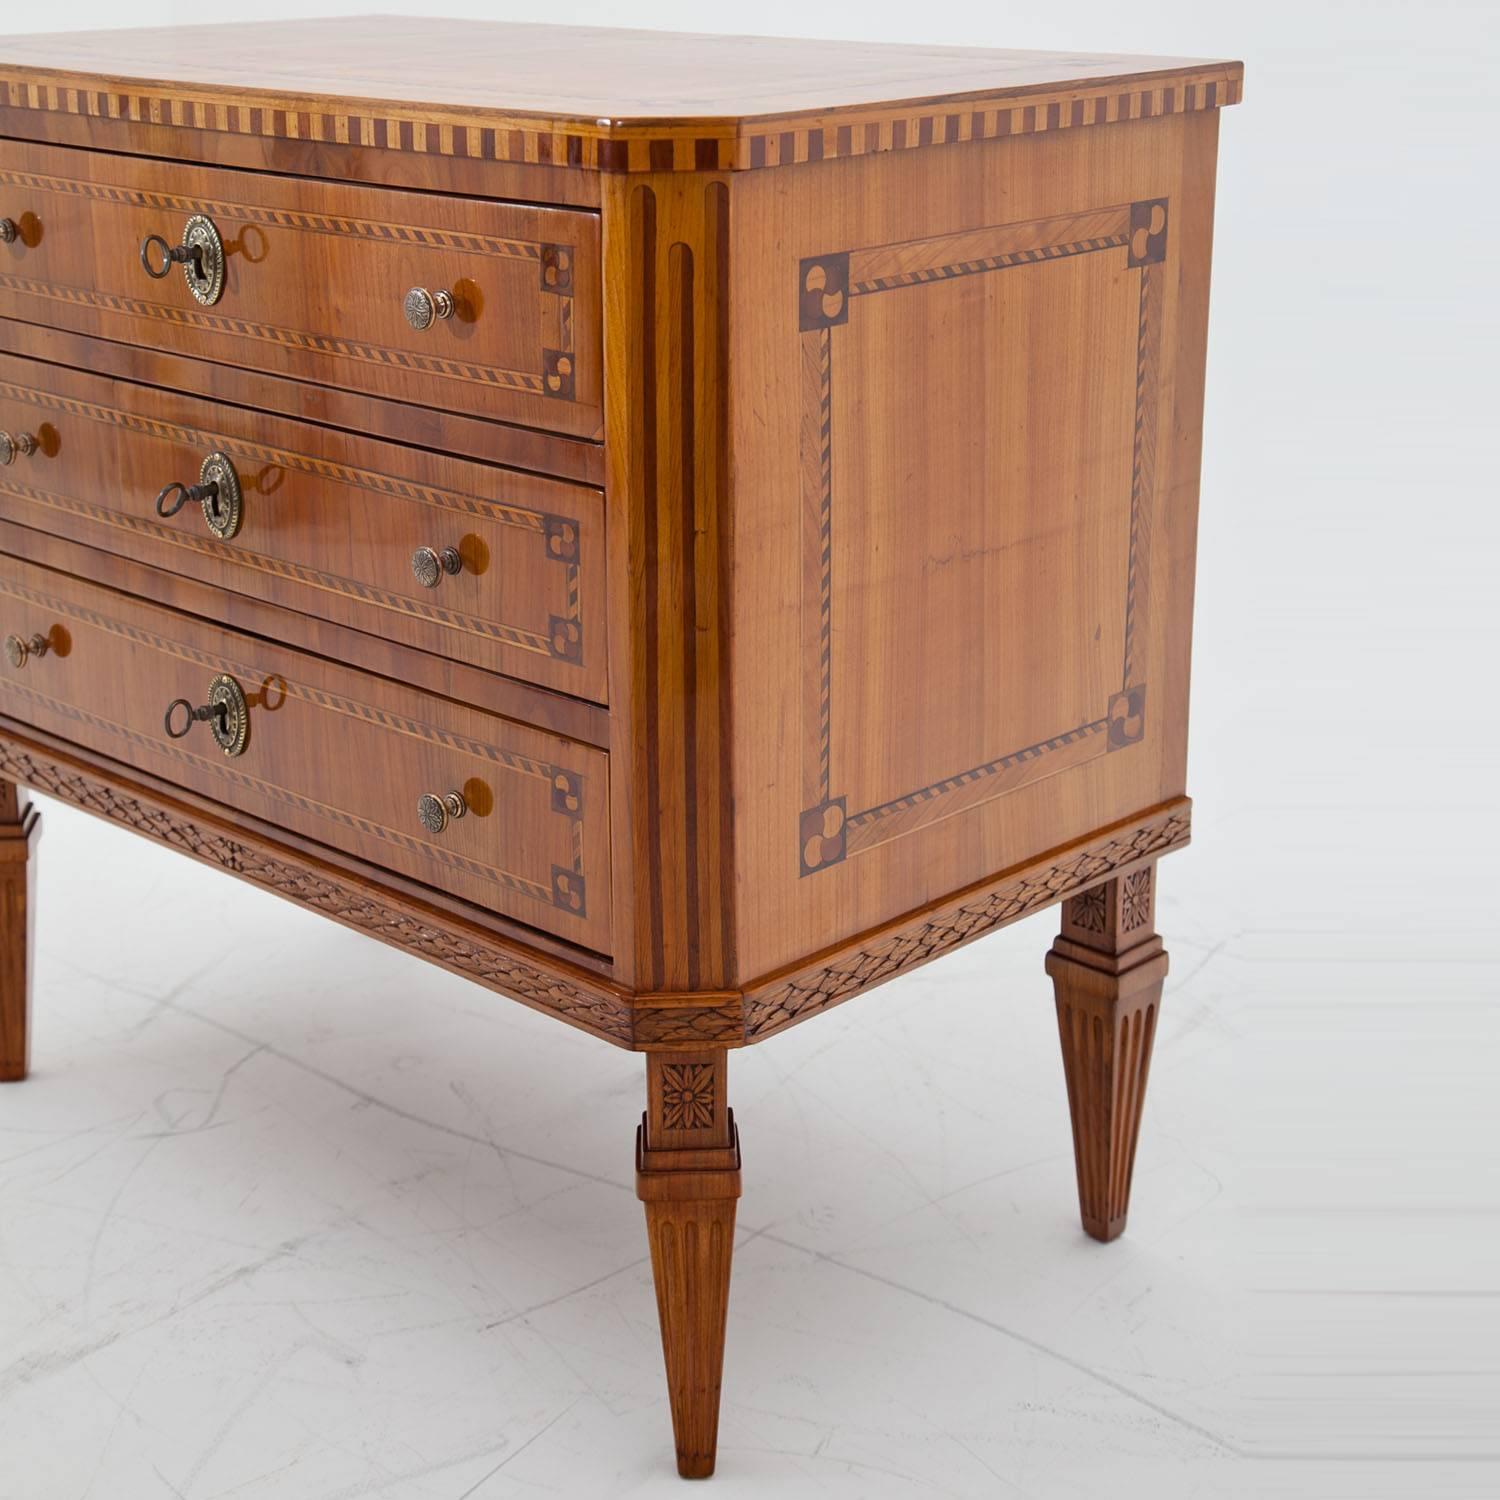 Louis Seize-Style Chest of Drawers, 19th Century (Kirsche)